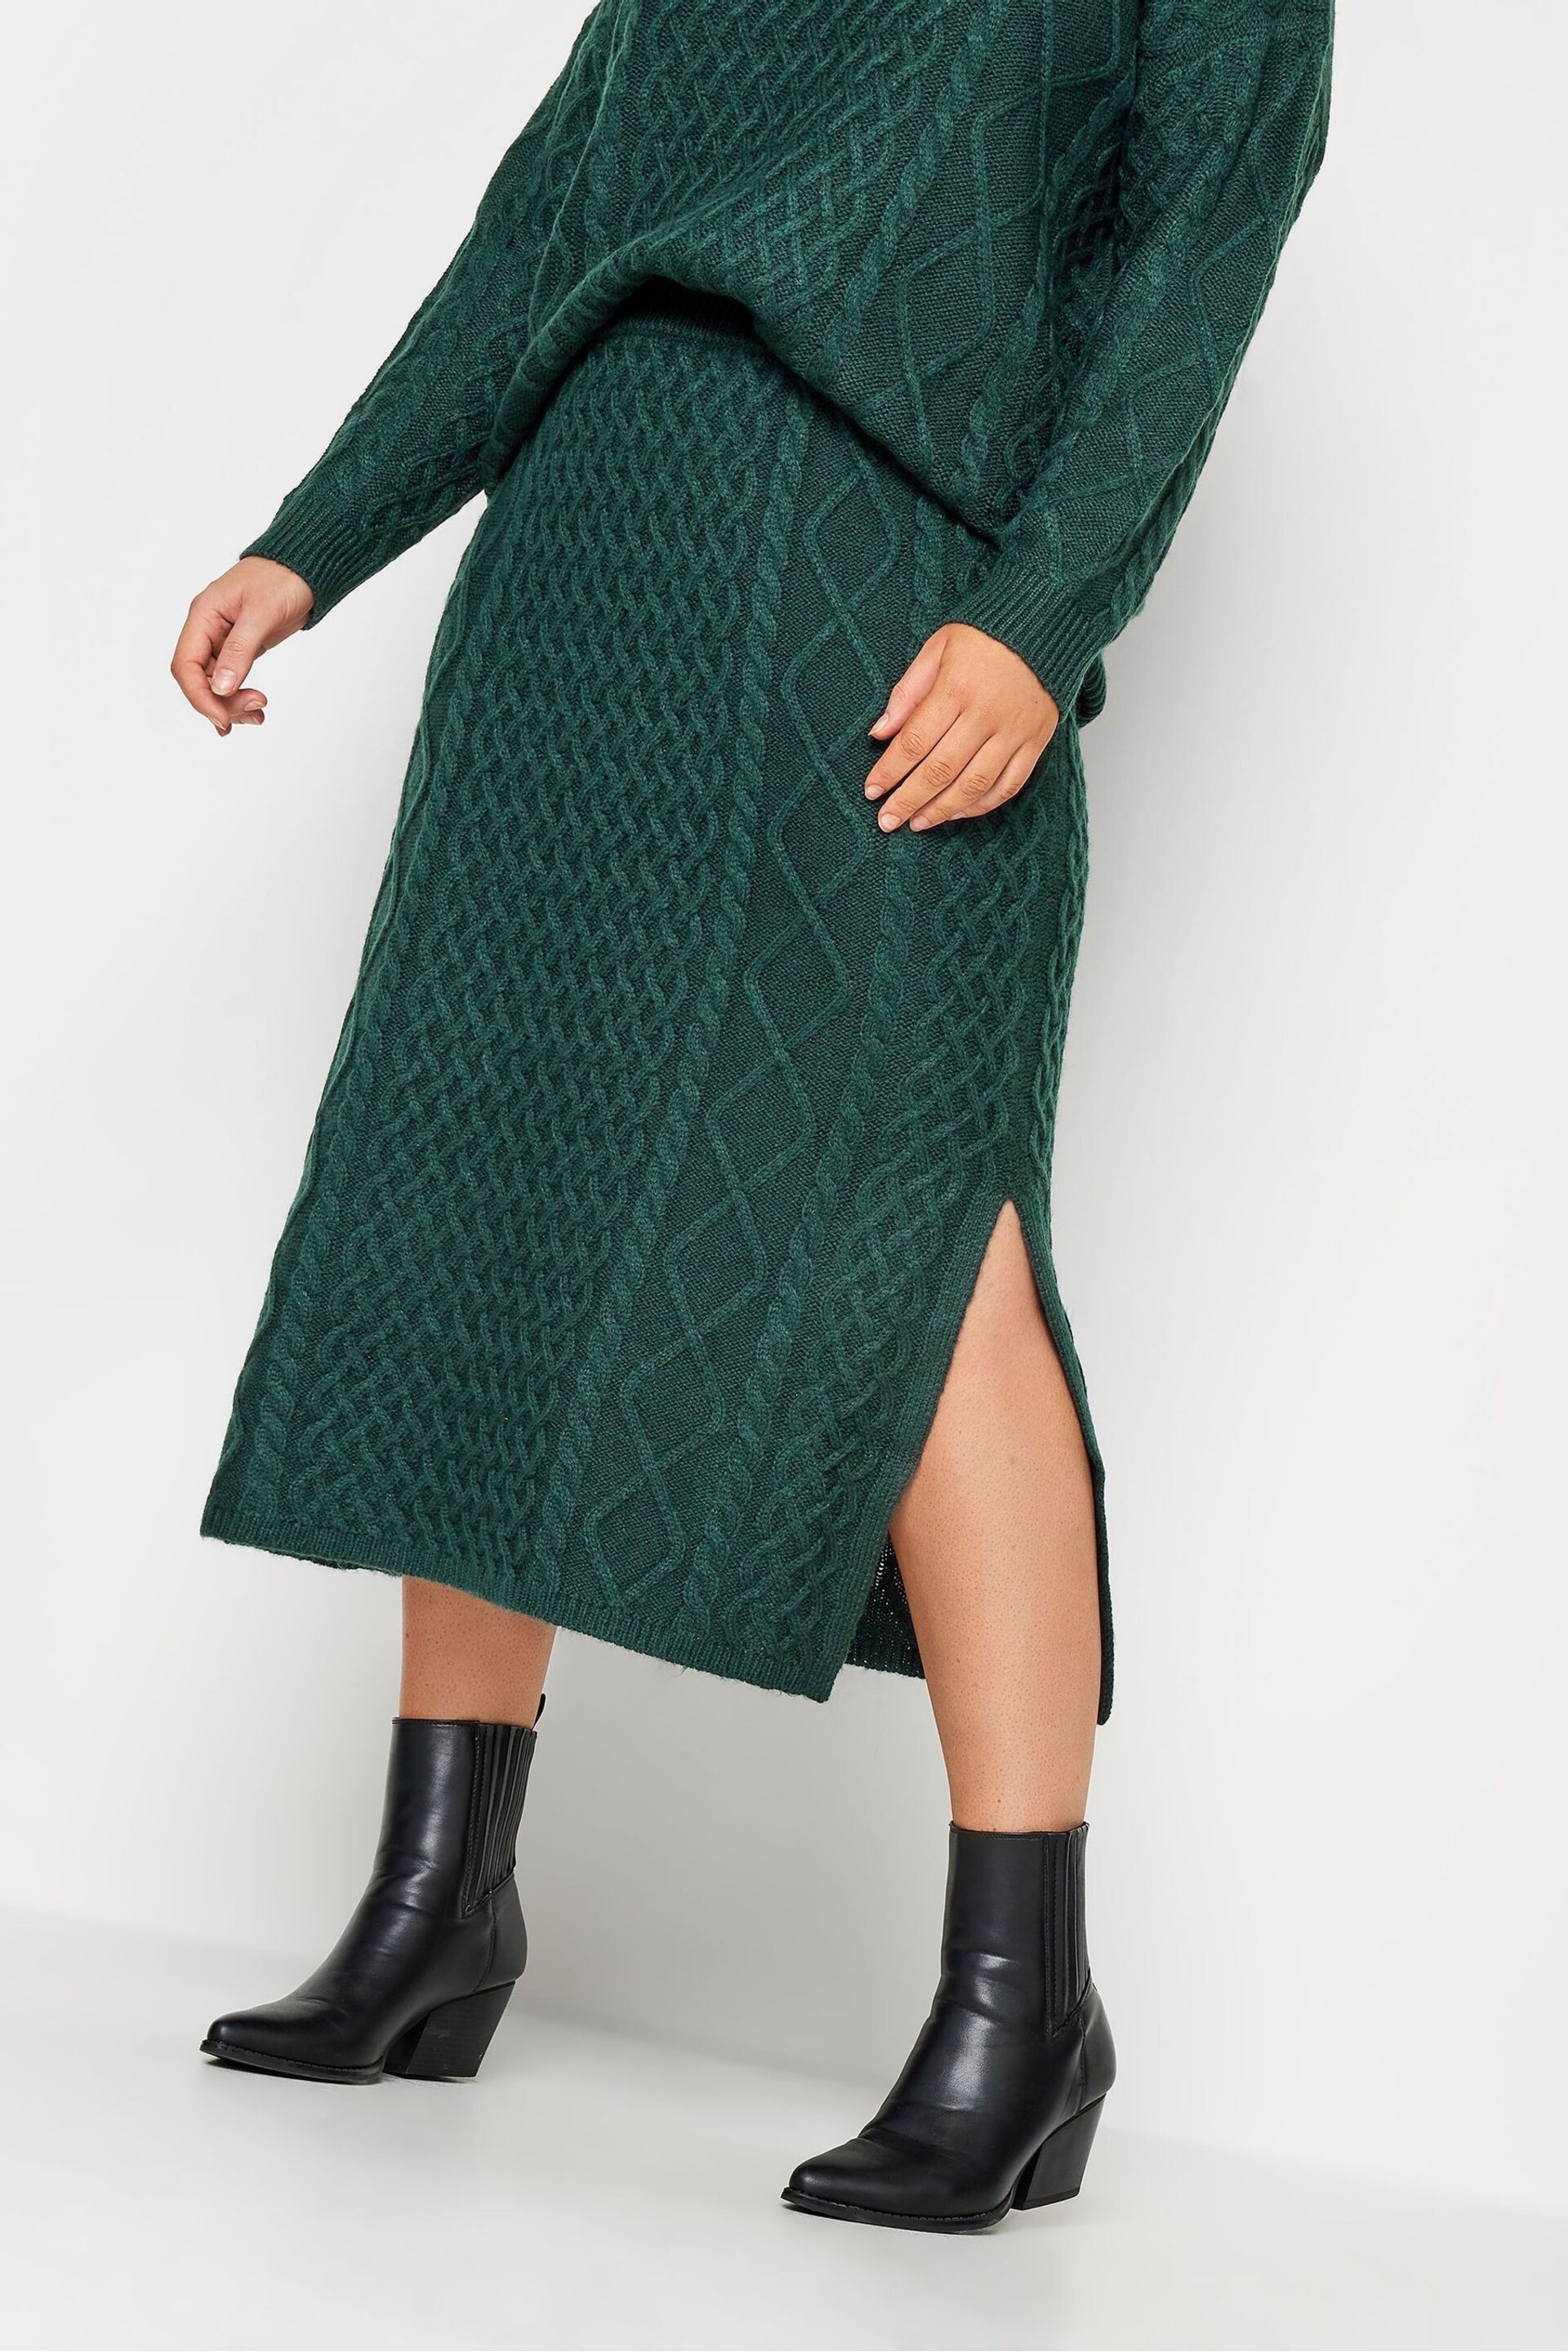 Yours Curve Green Cable Skirt - Image 1 of 4